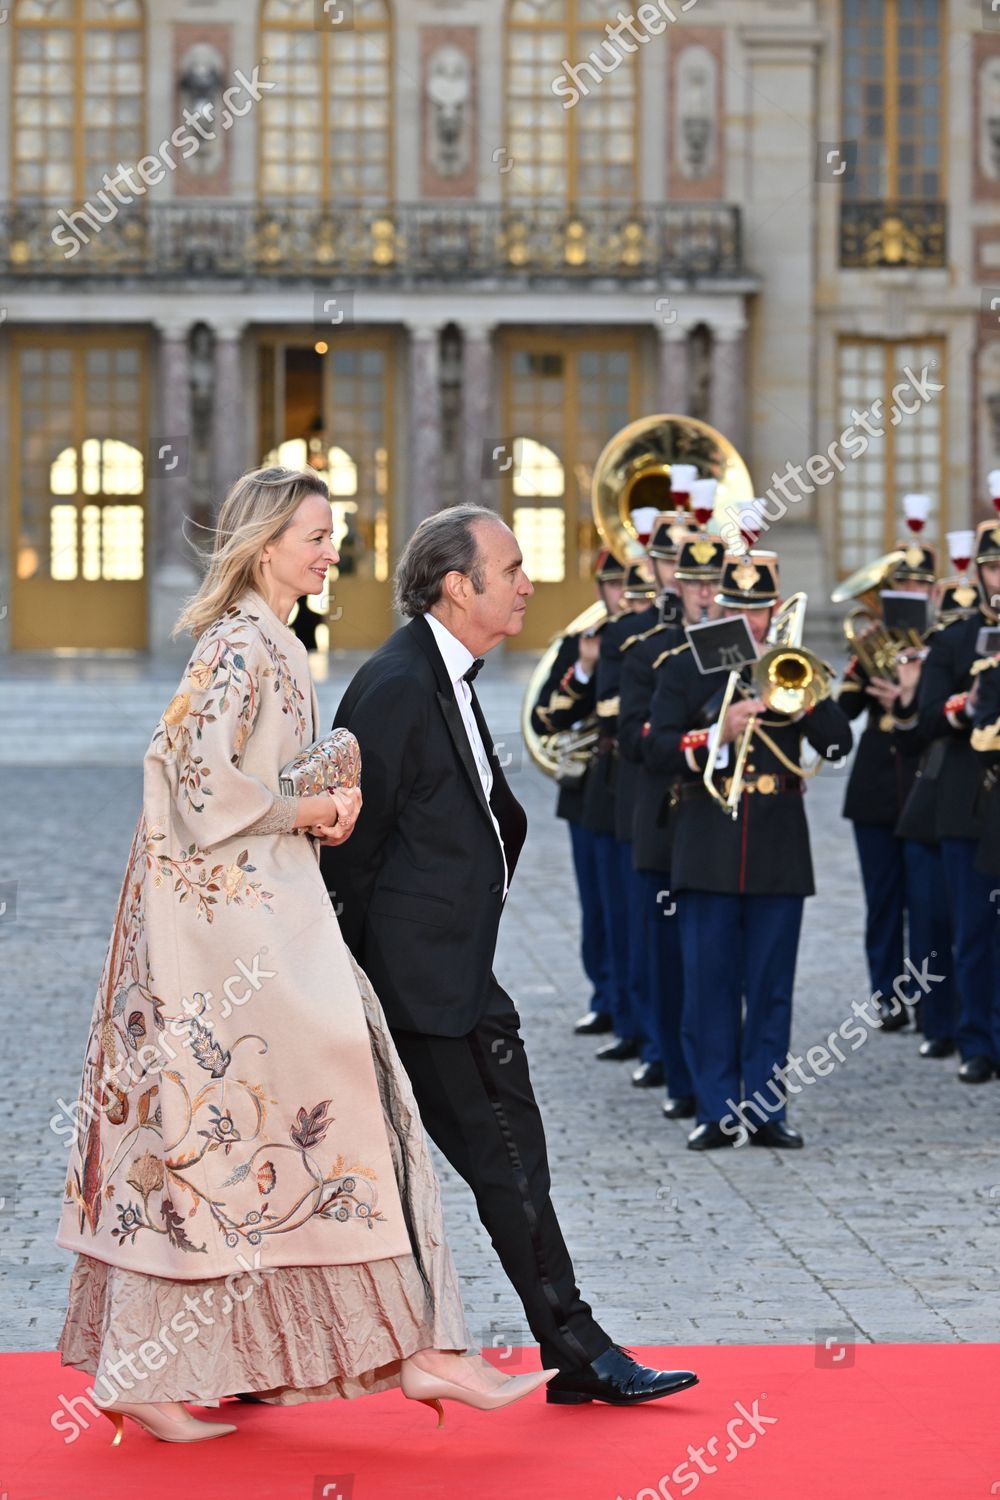 Xavier Niel and Delphine Arnault arriving at the funeral ceremony